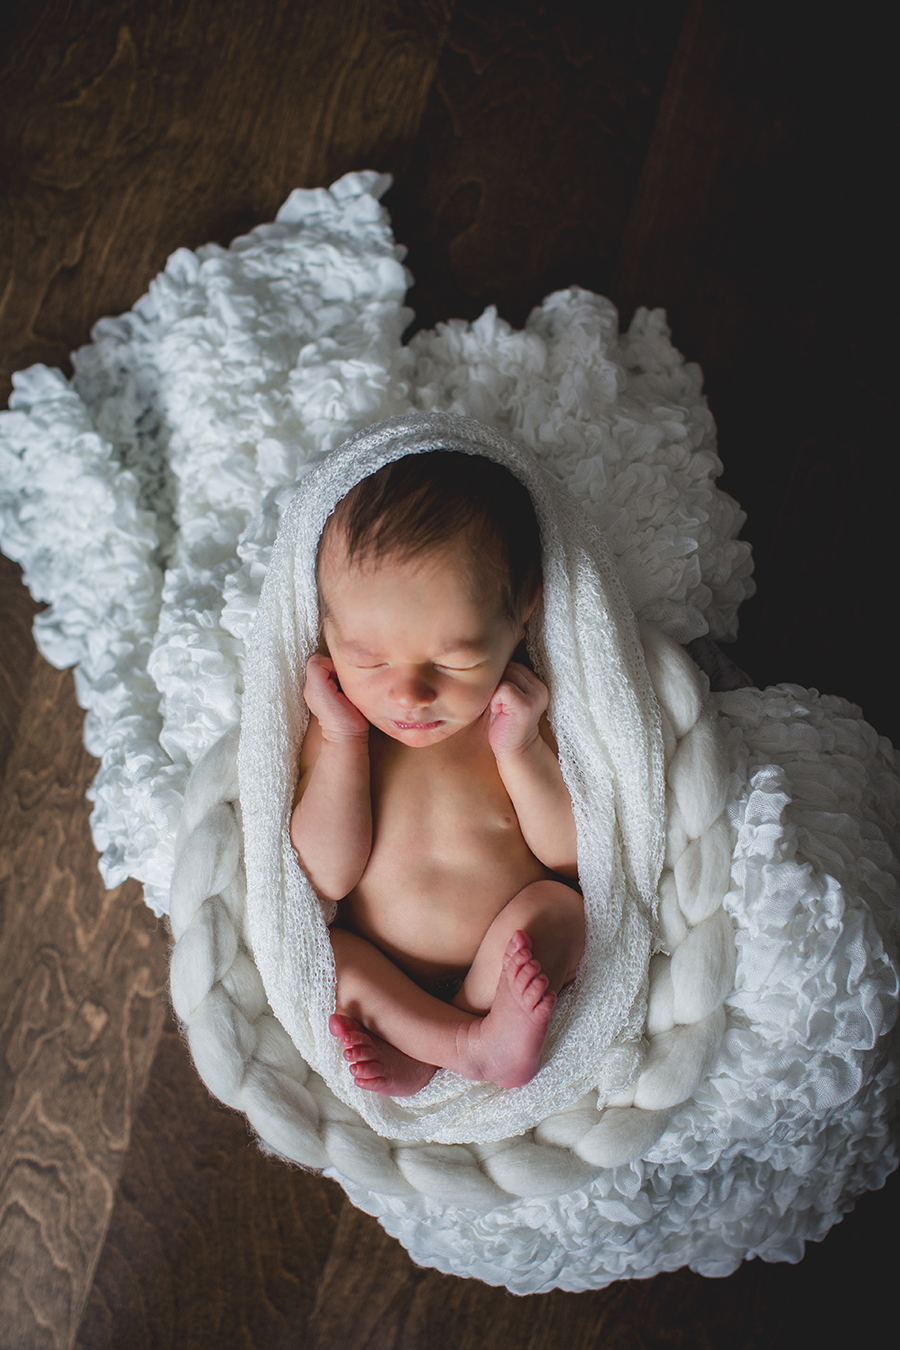 Swaddled in a basket by Knoxville Wedding Photographer, Amanda May Photos.